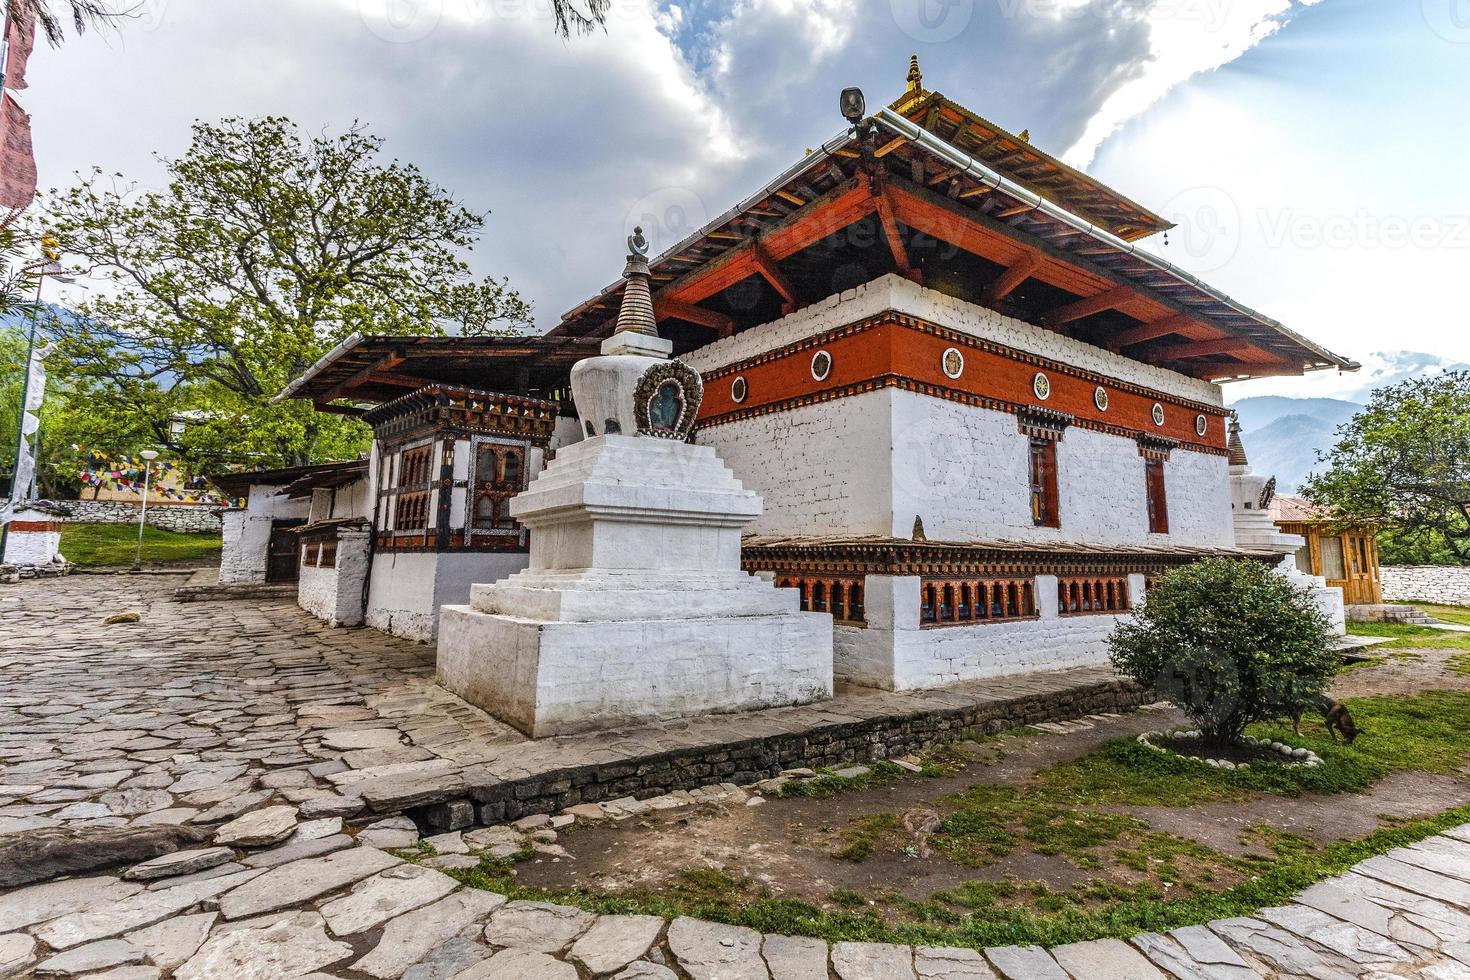 Exterior of Kyichu Lhakhang temple in Paro Valley, Eastern Bhutan - Asia photo